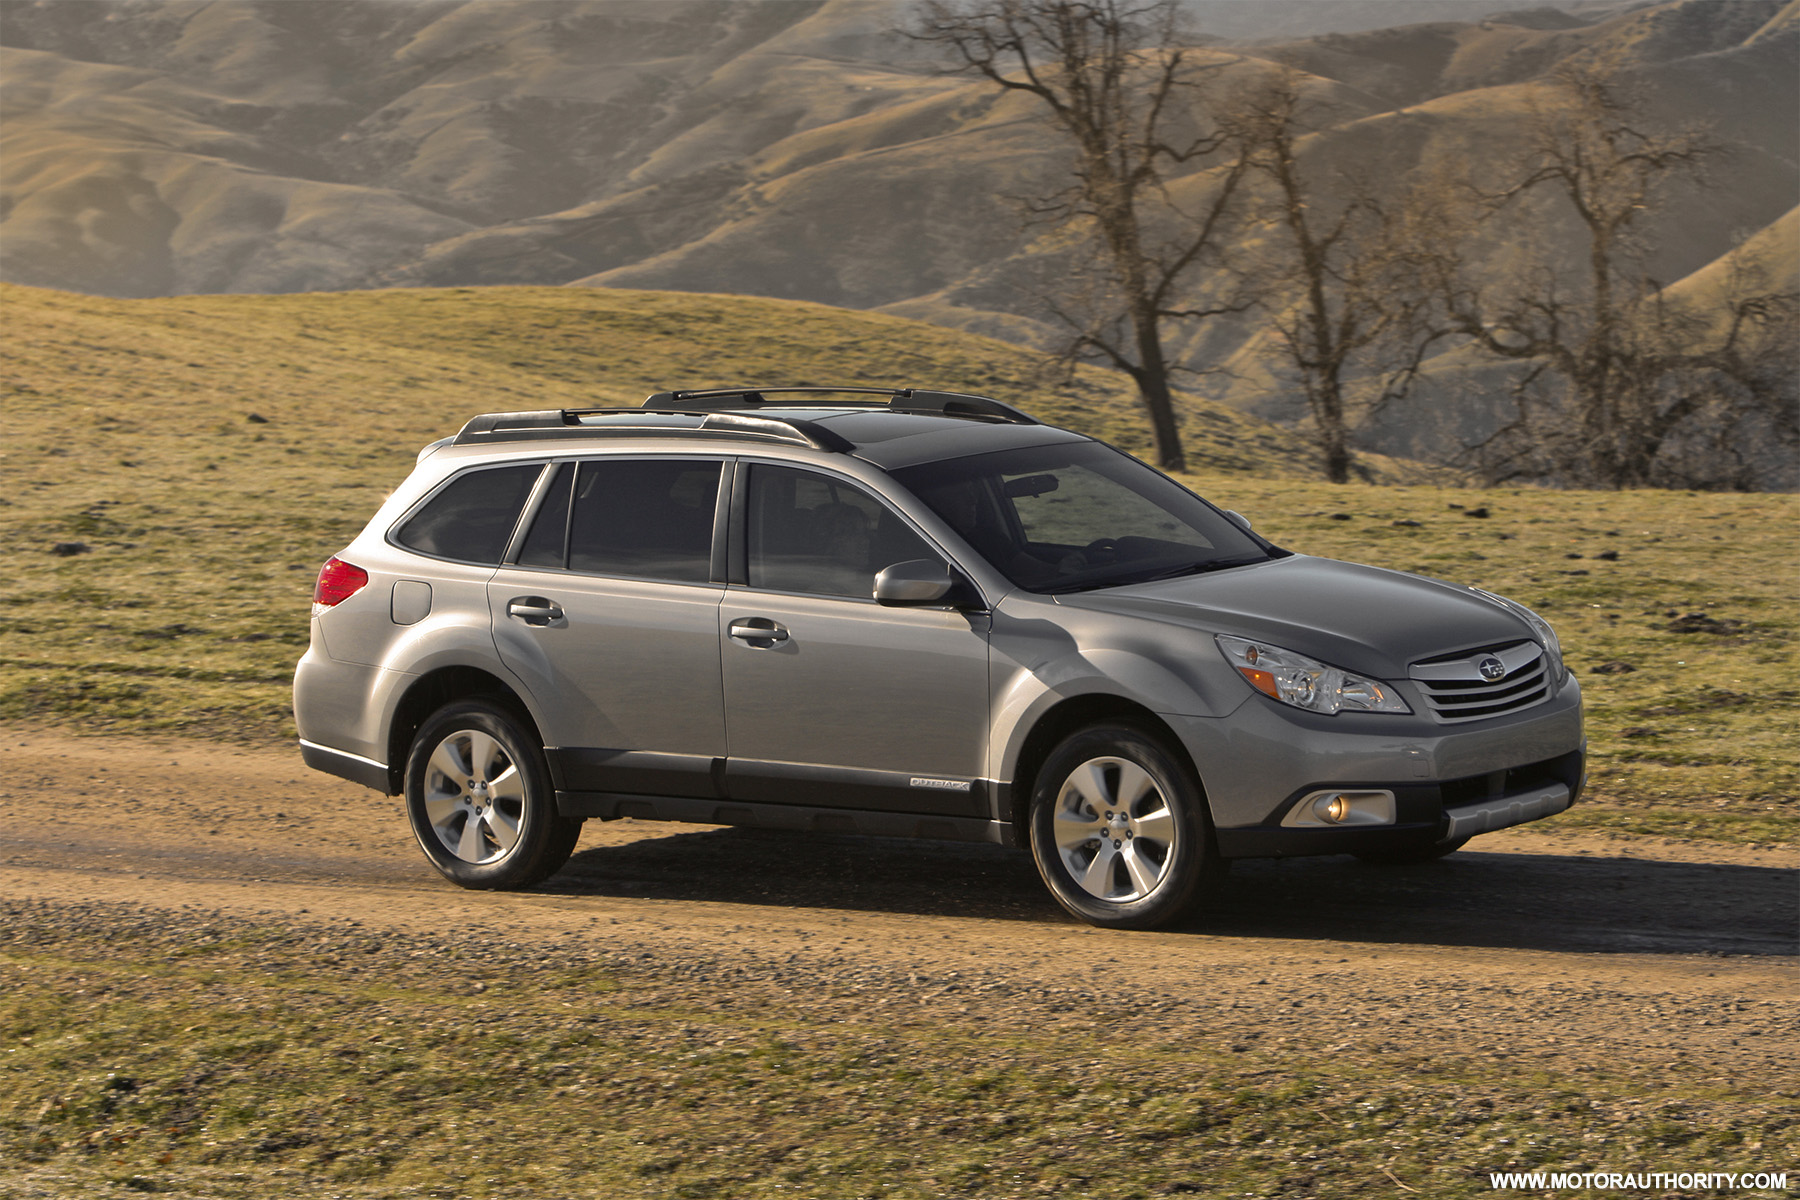 Subaru S New Outback Gains Size Features